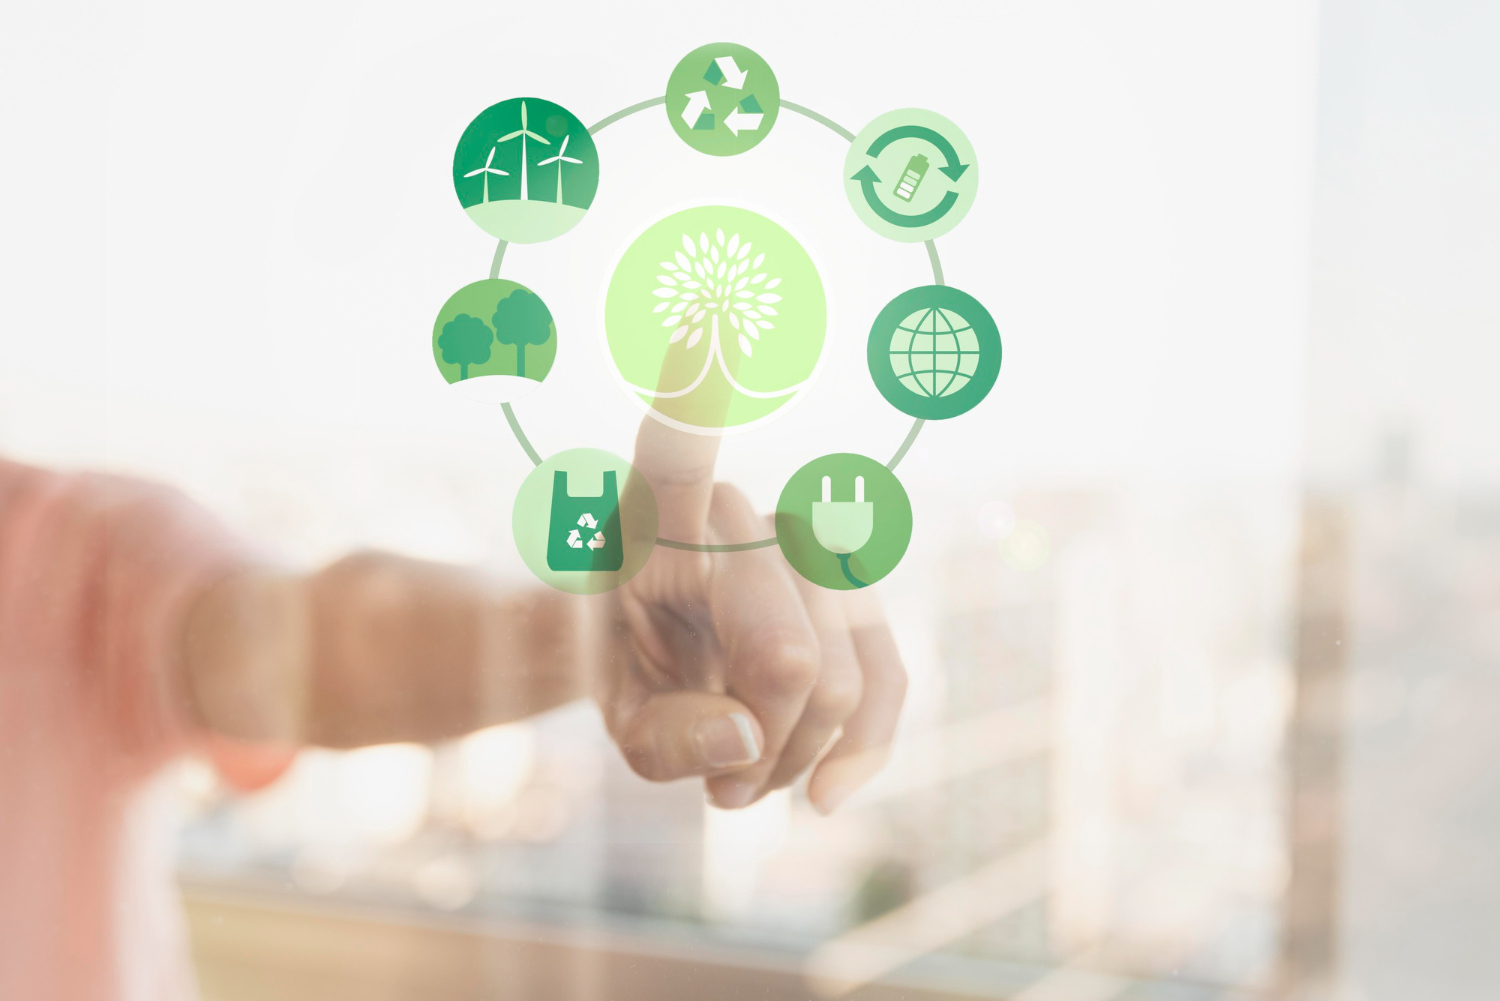 Technology Your Business Can Embrace to Reach Net Zero